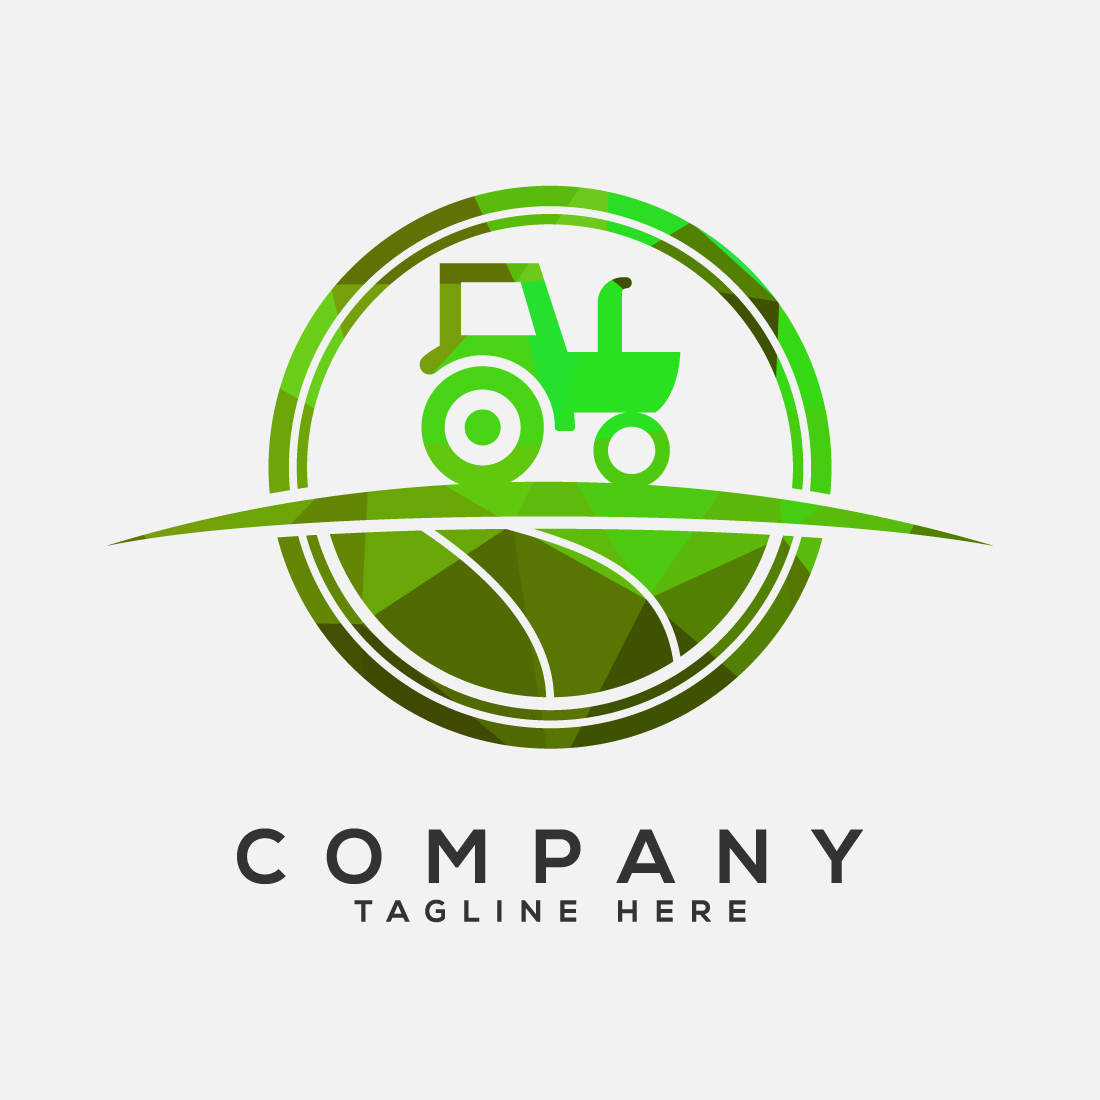 Tractor or farm low poly style logo design, suitable for any business related to agriculture industries preview image.